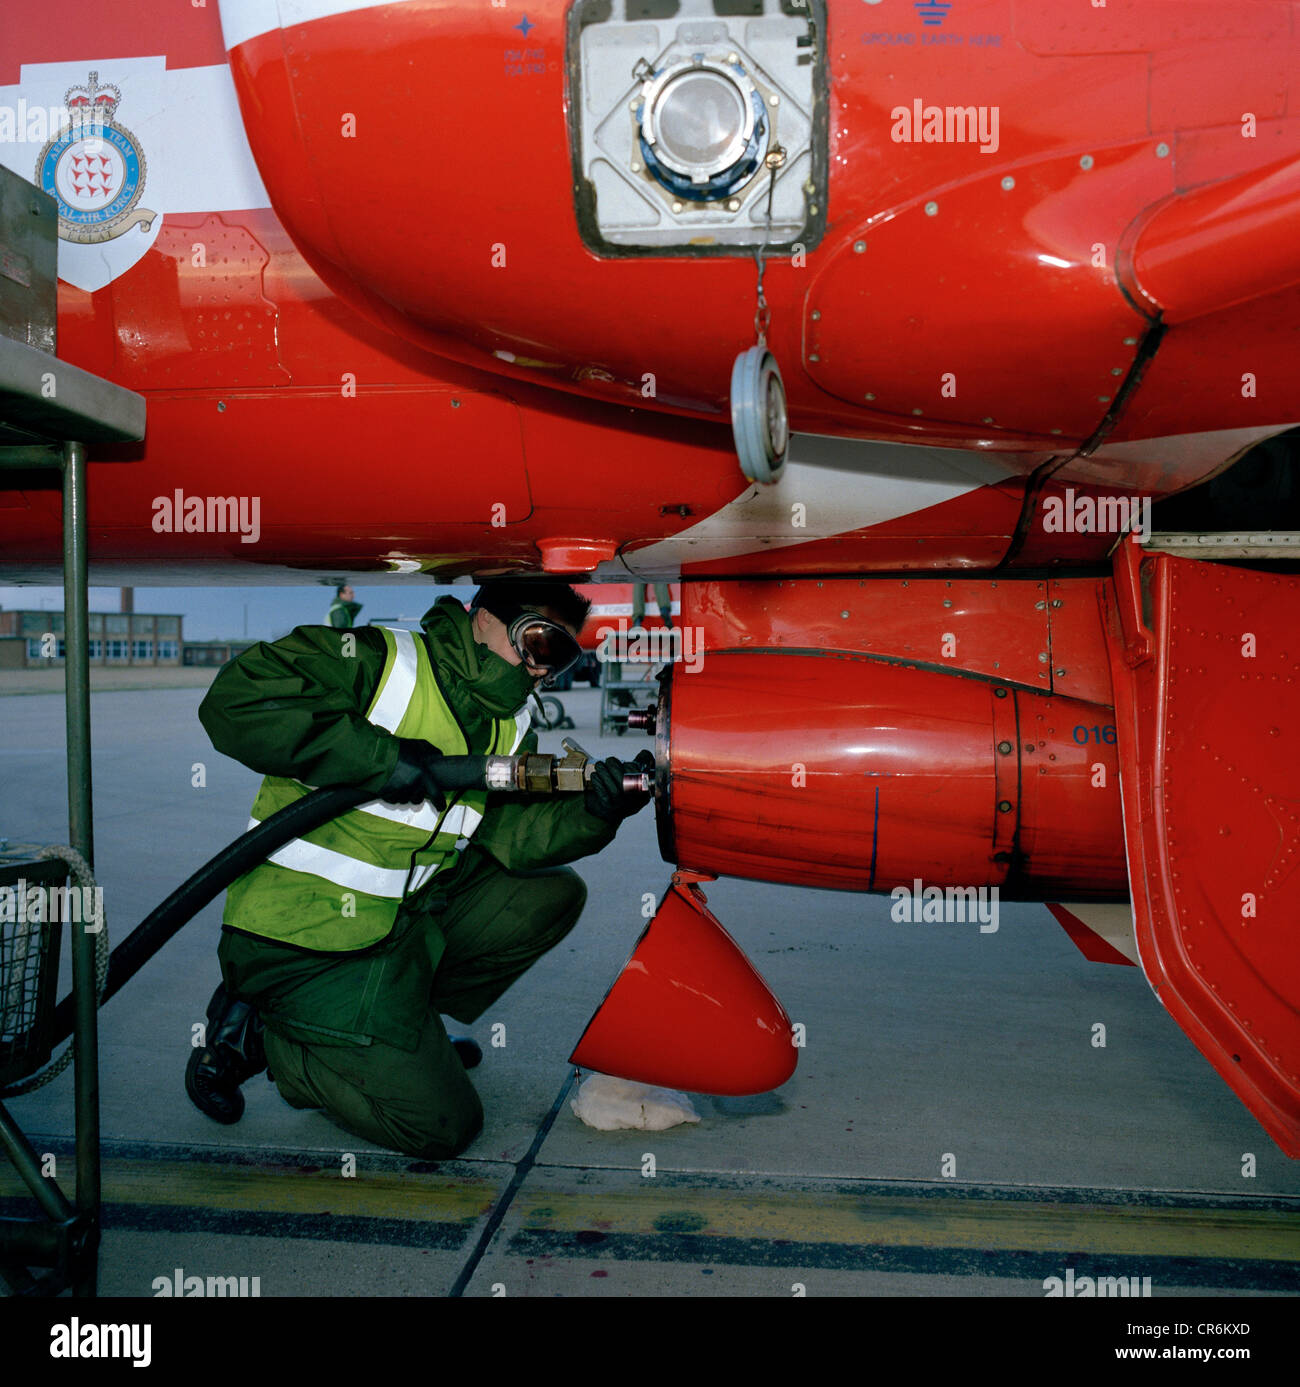 A dye team engineer refills the dye-derv mixture to Hawk jet's the smoke pod of the Red Arrows, Britain's RAF aerobatic team. Stock Photo